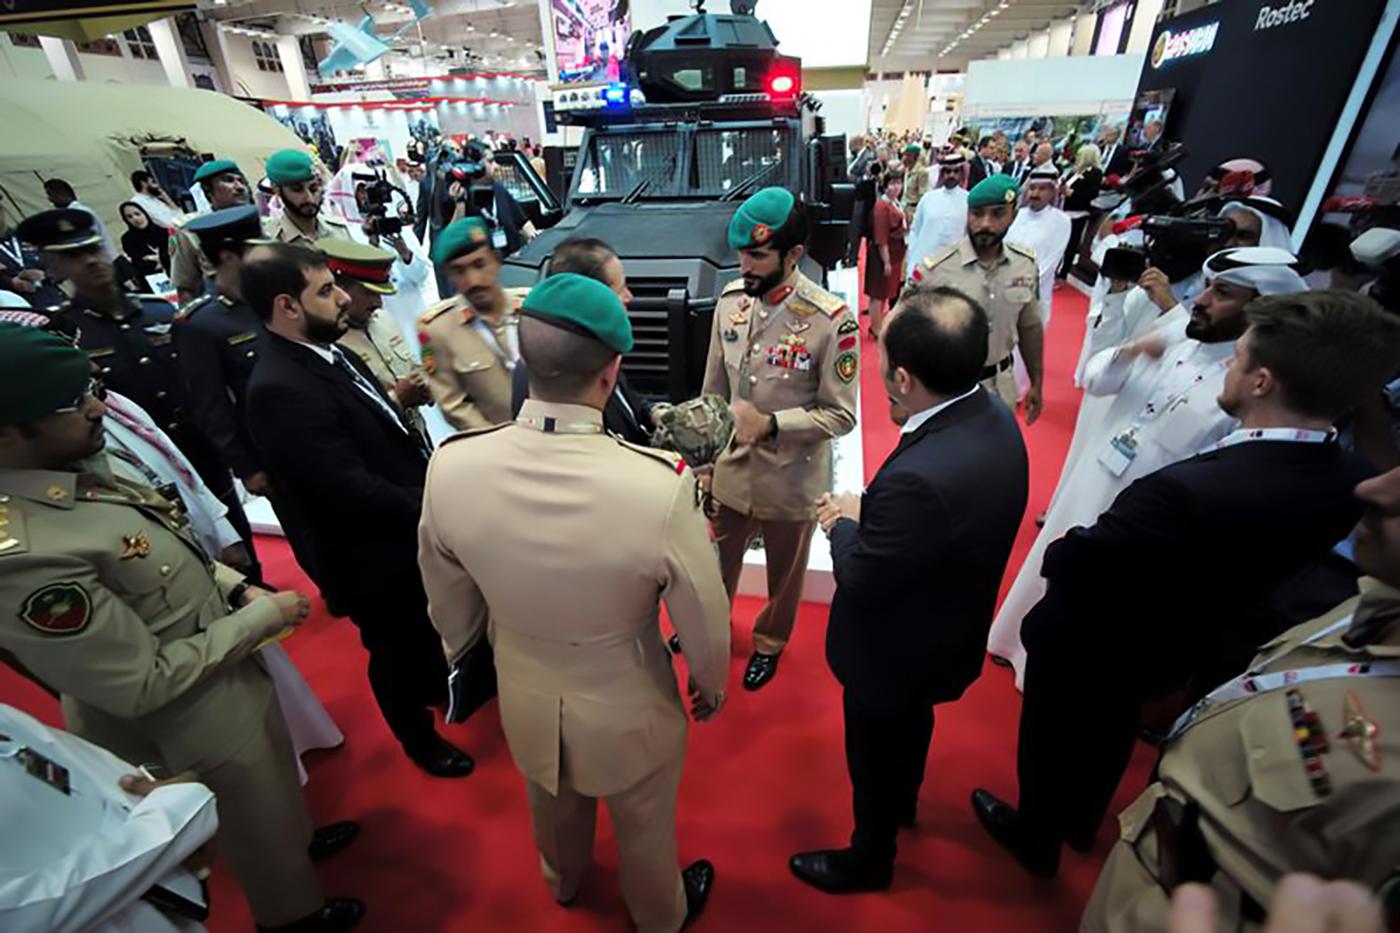 Head of Protocol and representative of the King of Bahrain, Brigadier Sheikh Nasser bin Hamad al Khalifa (C) inspects an armoured military ballistic helmet during inauguration of Bahrain International Defense Exhibition and Conference at the Bahrain Exhib